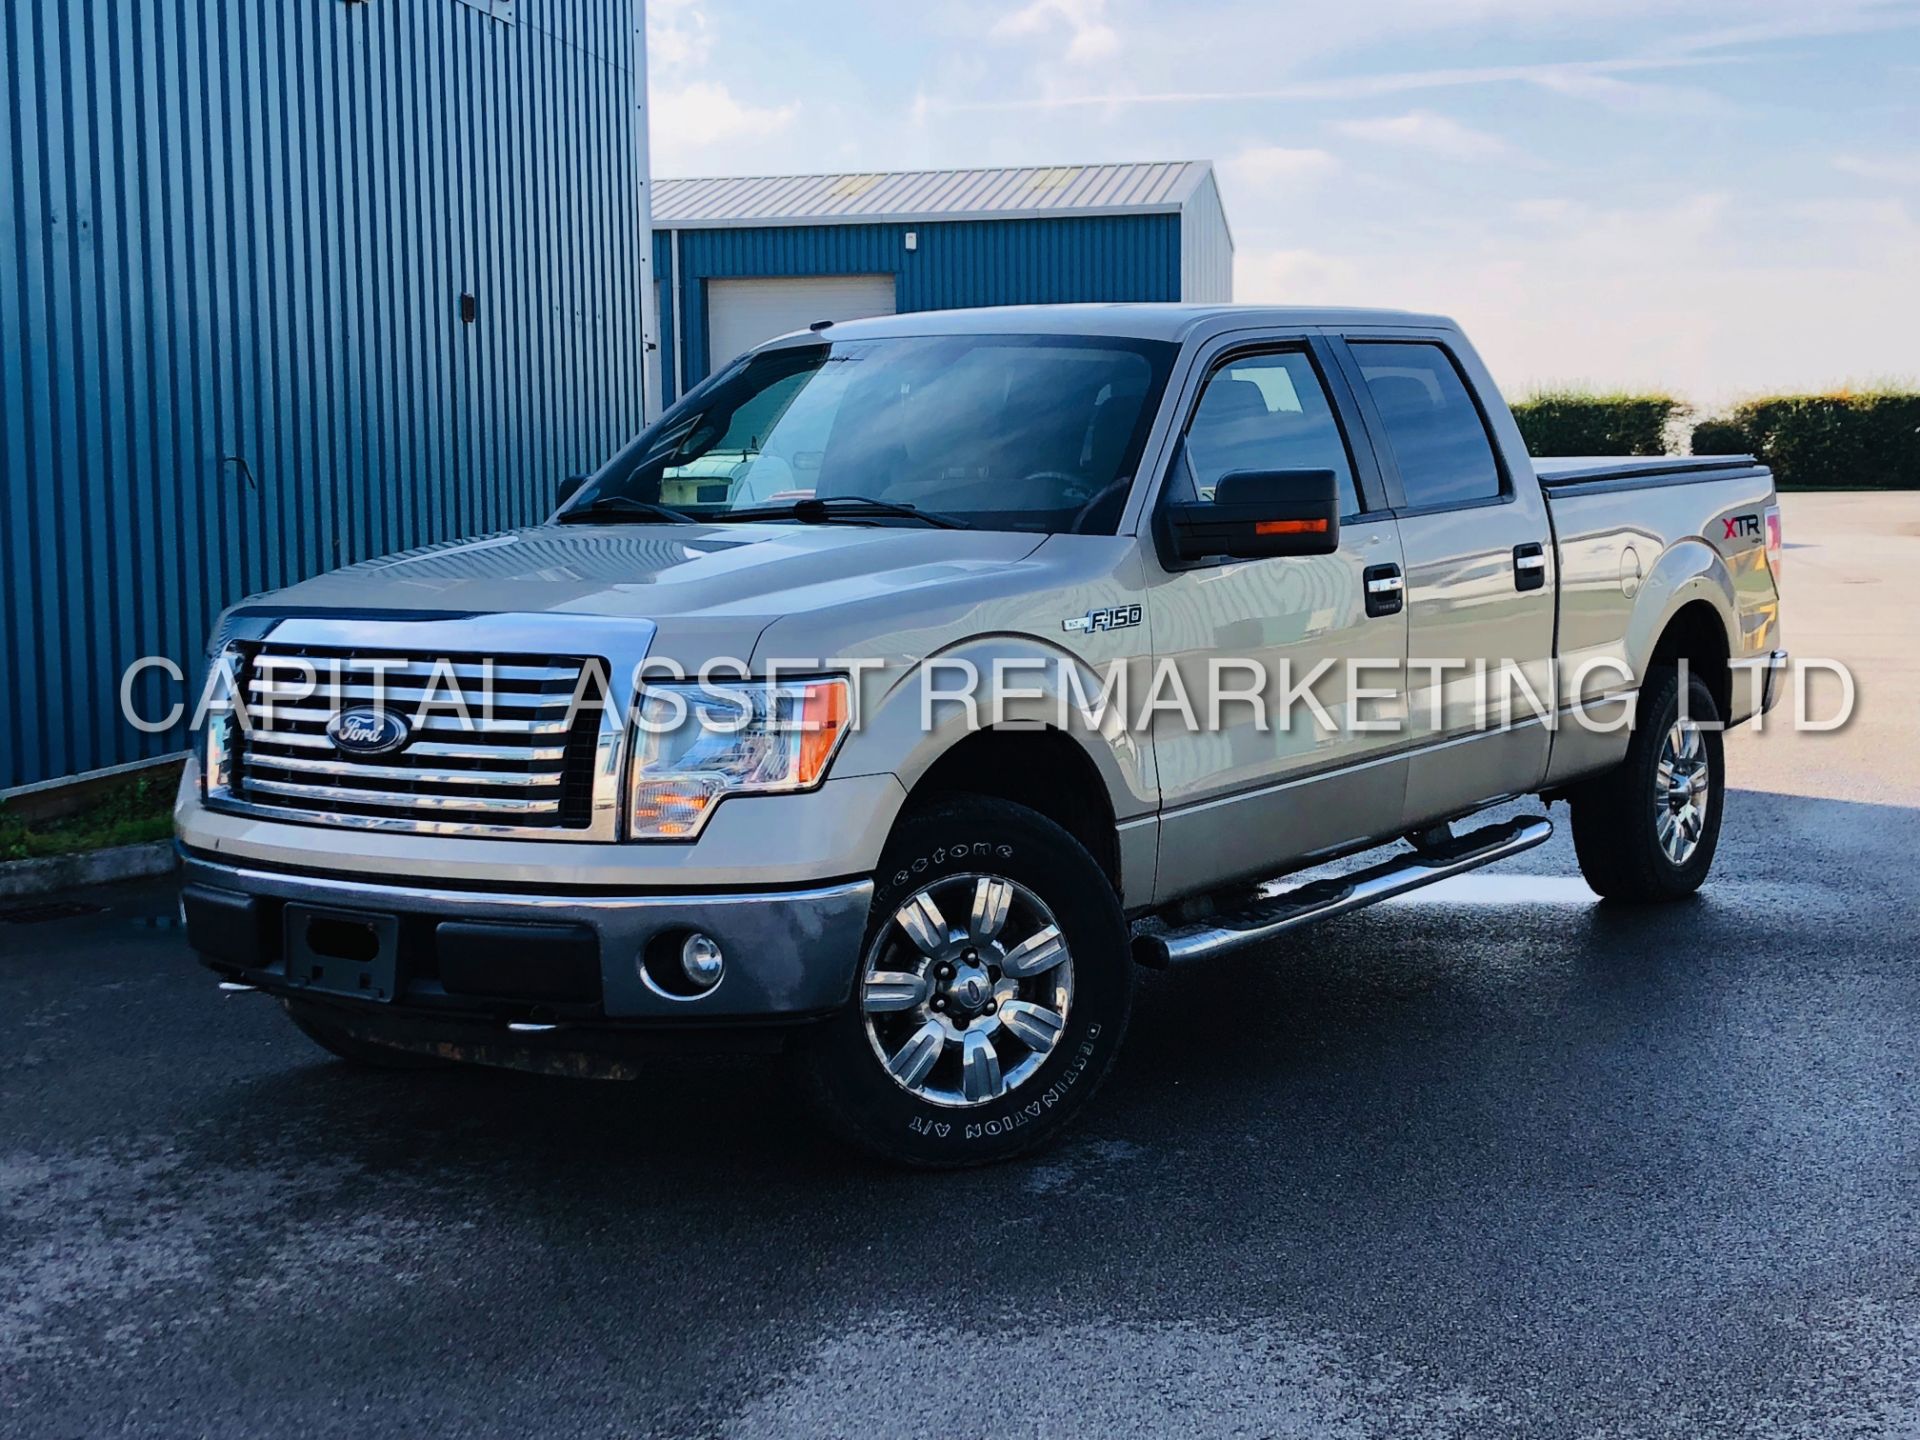 FORD F-150 *XTR / XLT EDITION* SUPER CREW CAB PICK-UP (2010) '4.6L V8 - AUTOMATIC' **6 SEATER**